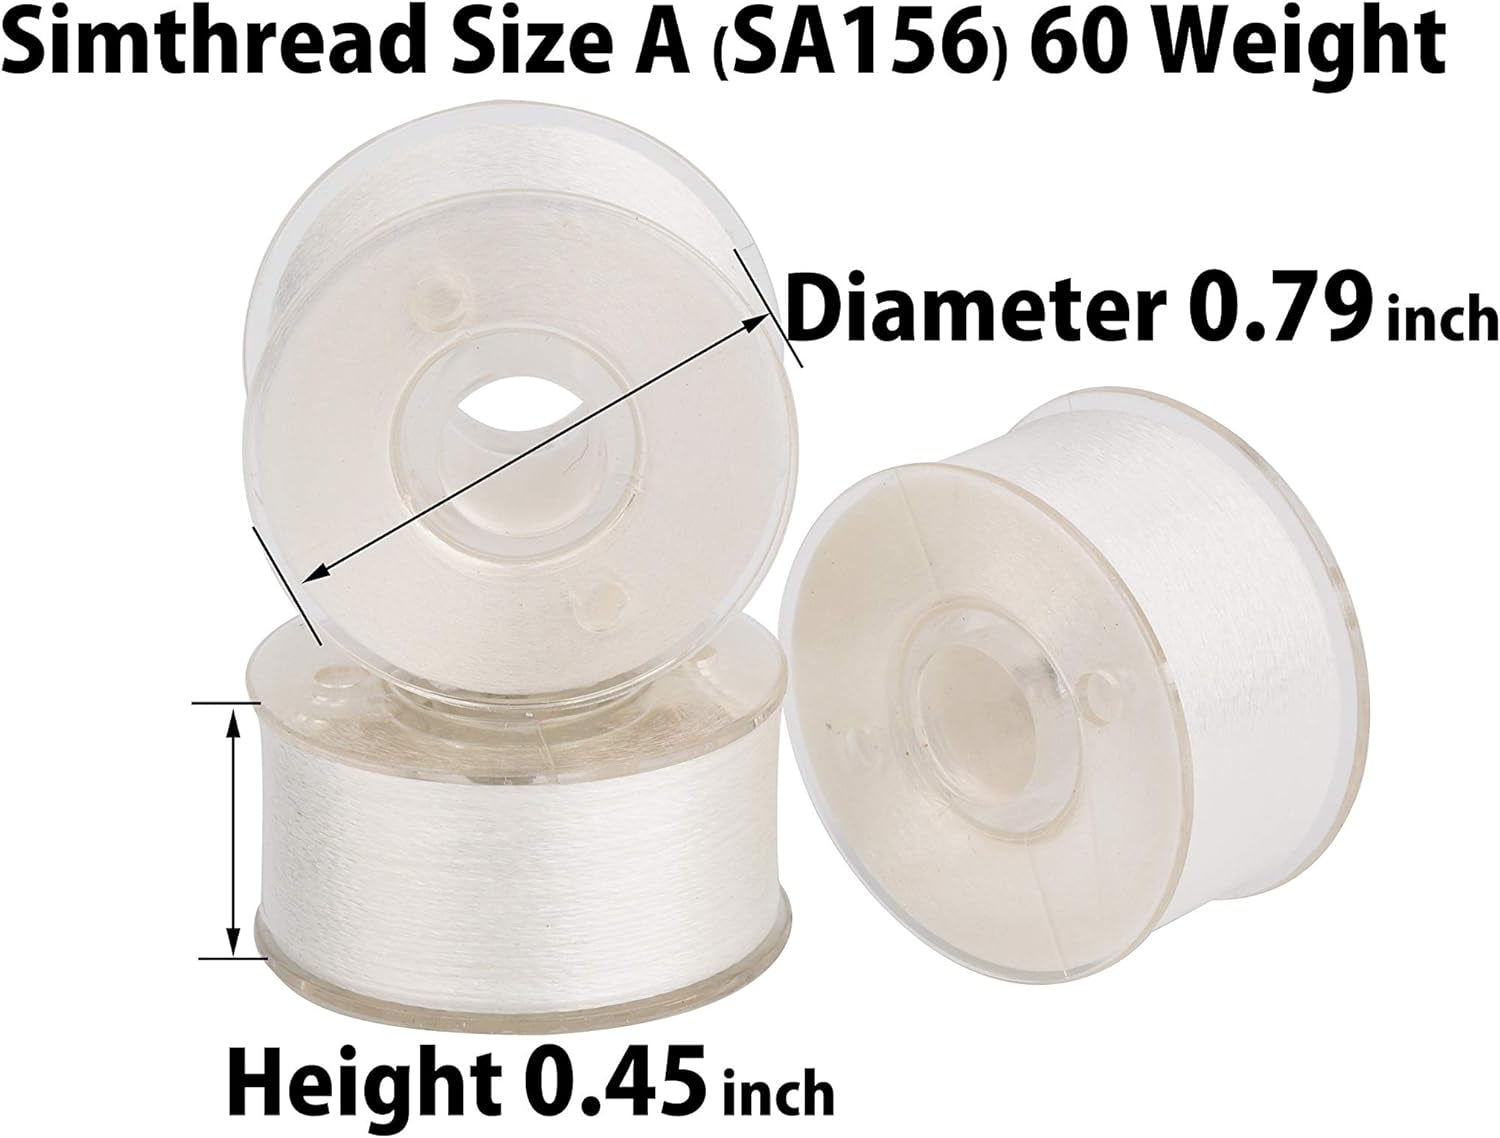 144Pcs Embroidery Pre-Wound Bobbins Thread, Class 15 Type a Size SA156, Polyester White 60 Wt, Bernina Pfaff Ambition Babylock Brother Embroidery and Sewing Machines Plastic Side